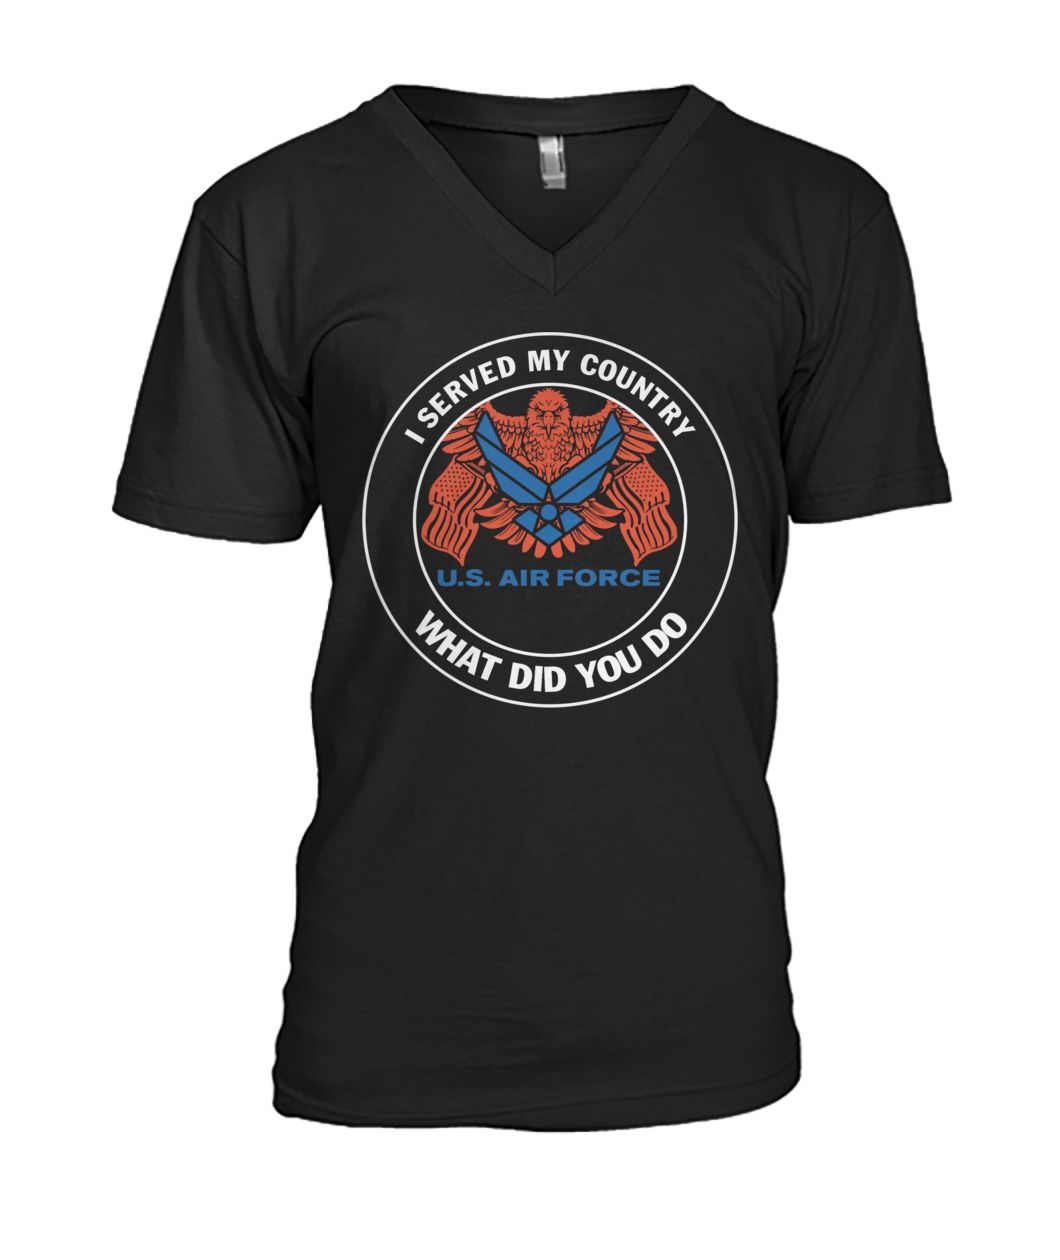 I served my country what did you do US air force mens v-neck